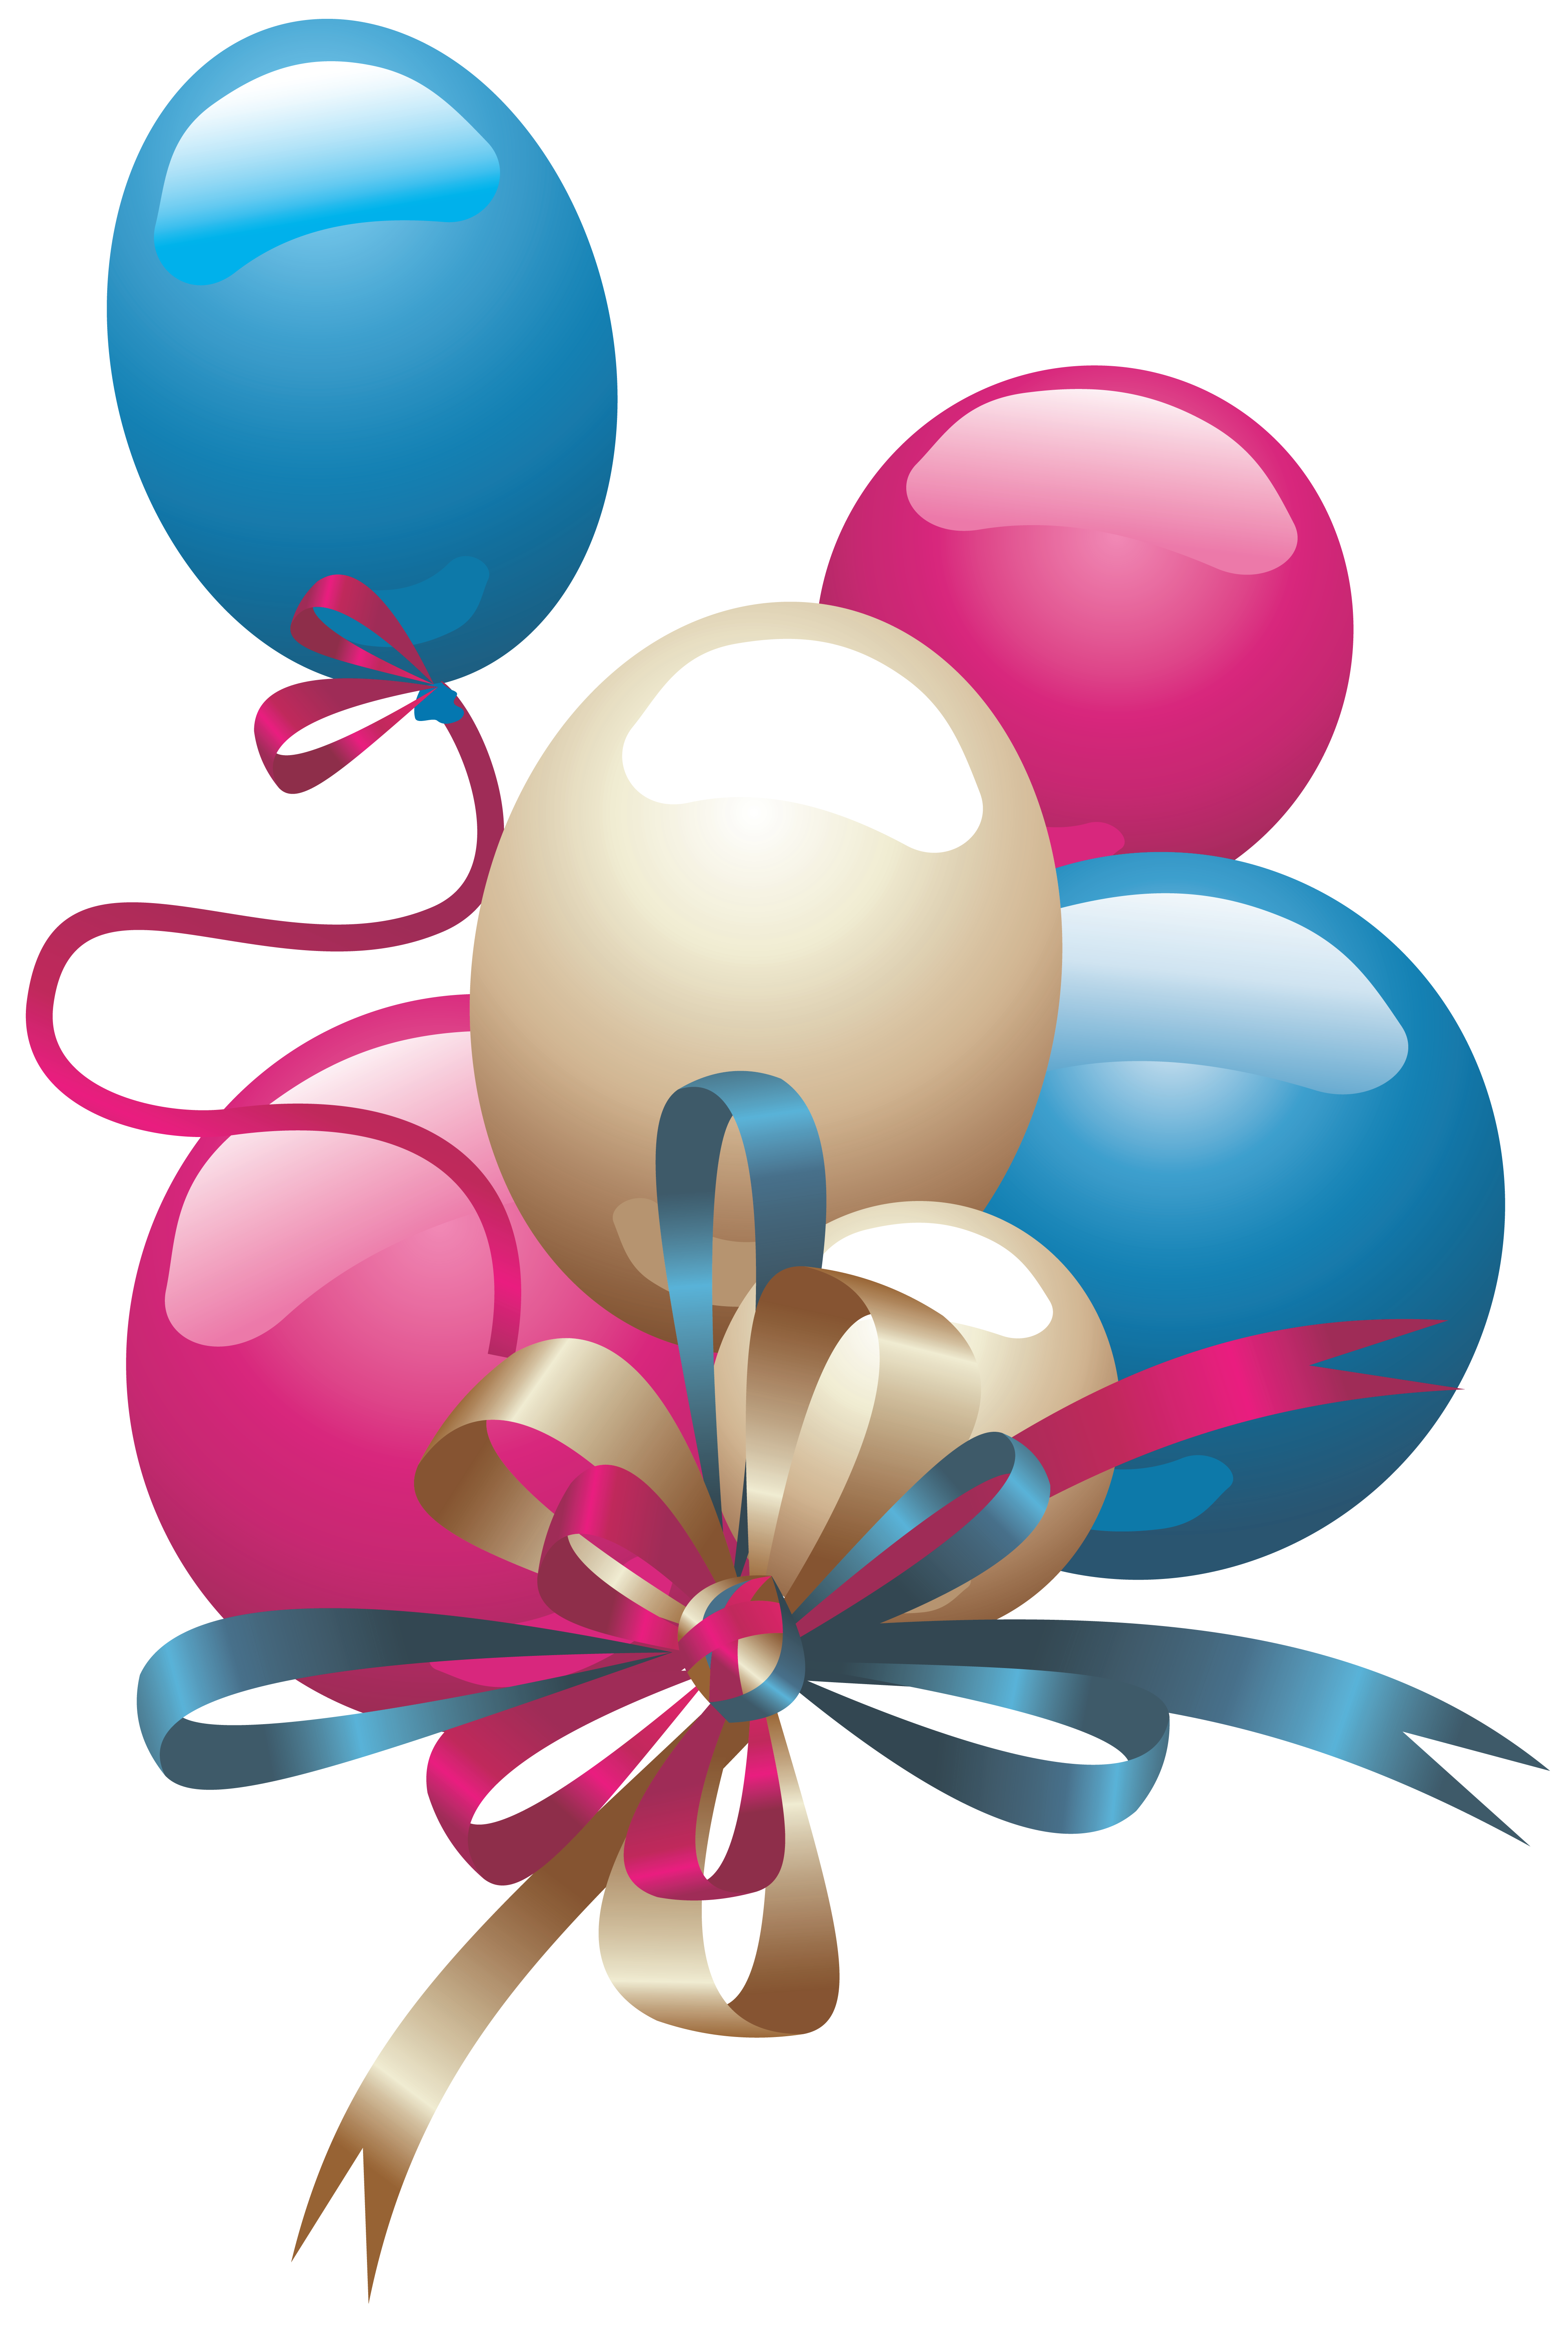 blue-balloons-png-transparent-background